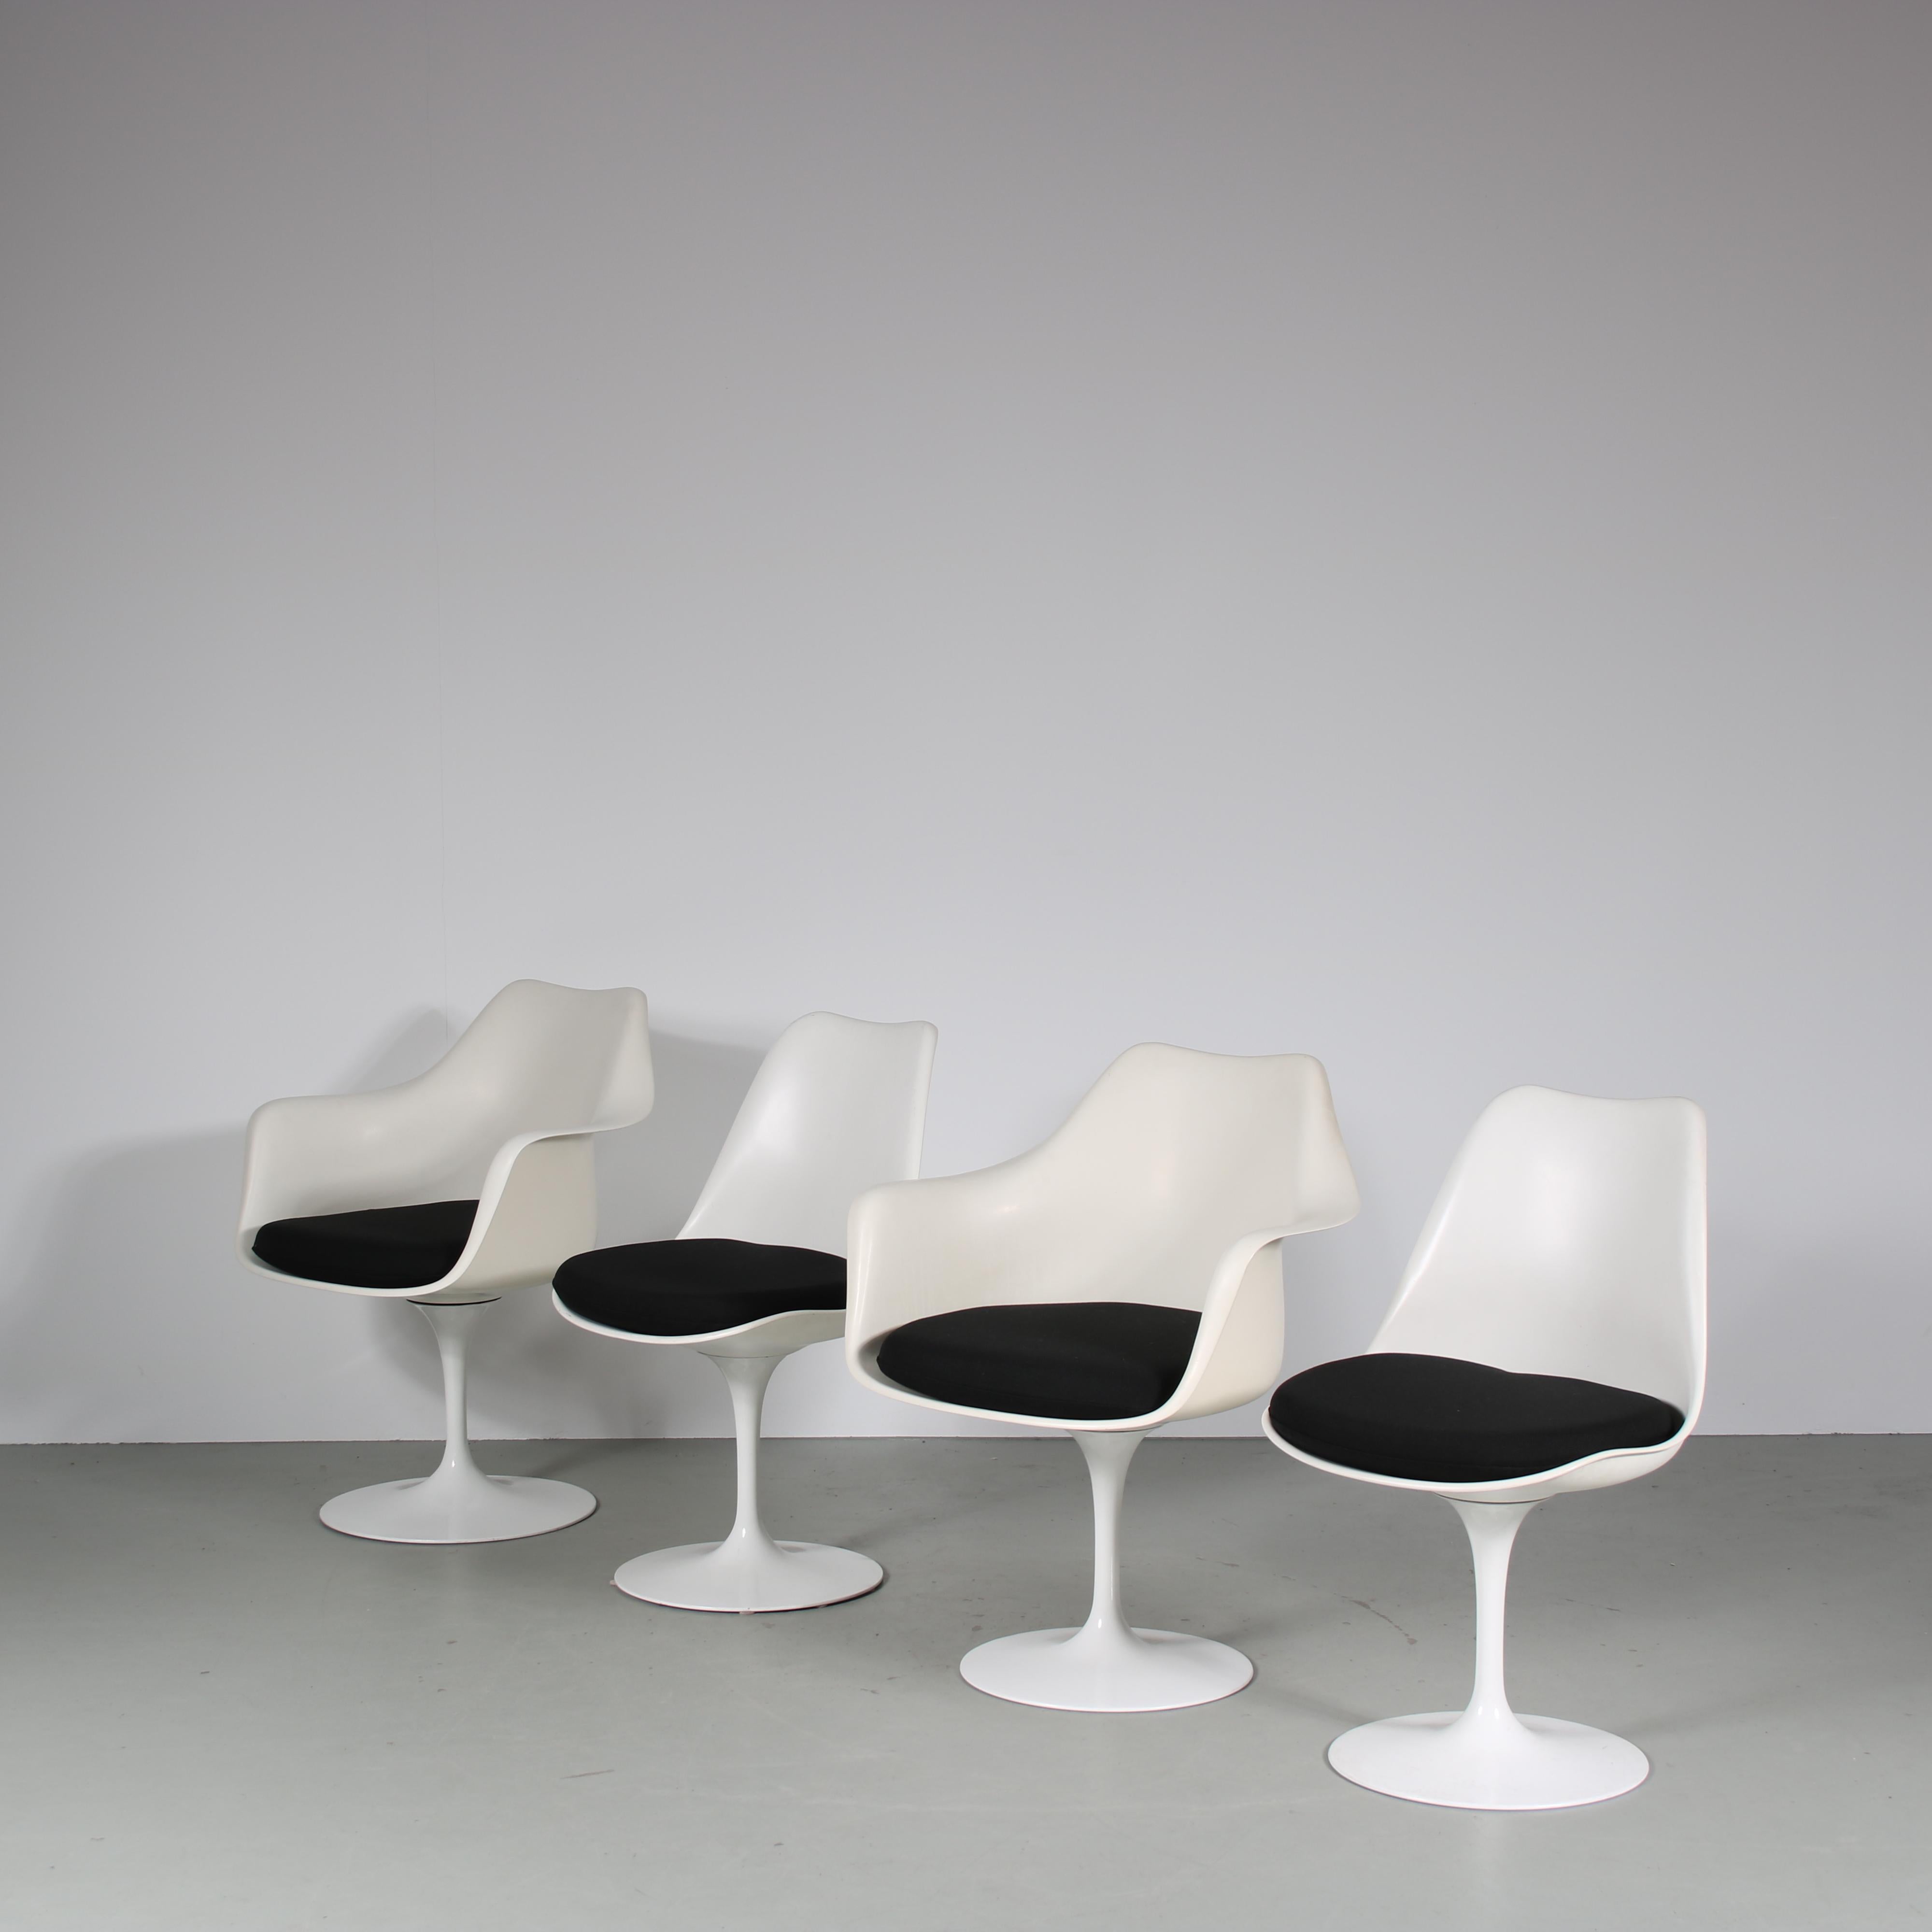 This set of four swivel dining chairs is a true icon of mid-century modern design, designed by Eero Saarinen and manufactured by Knoll International in the 1960s.

The chairs feature a sleek and minimalist tulip base in white aluminum, which